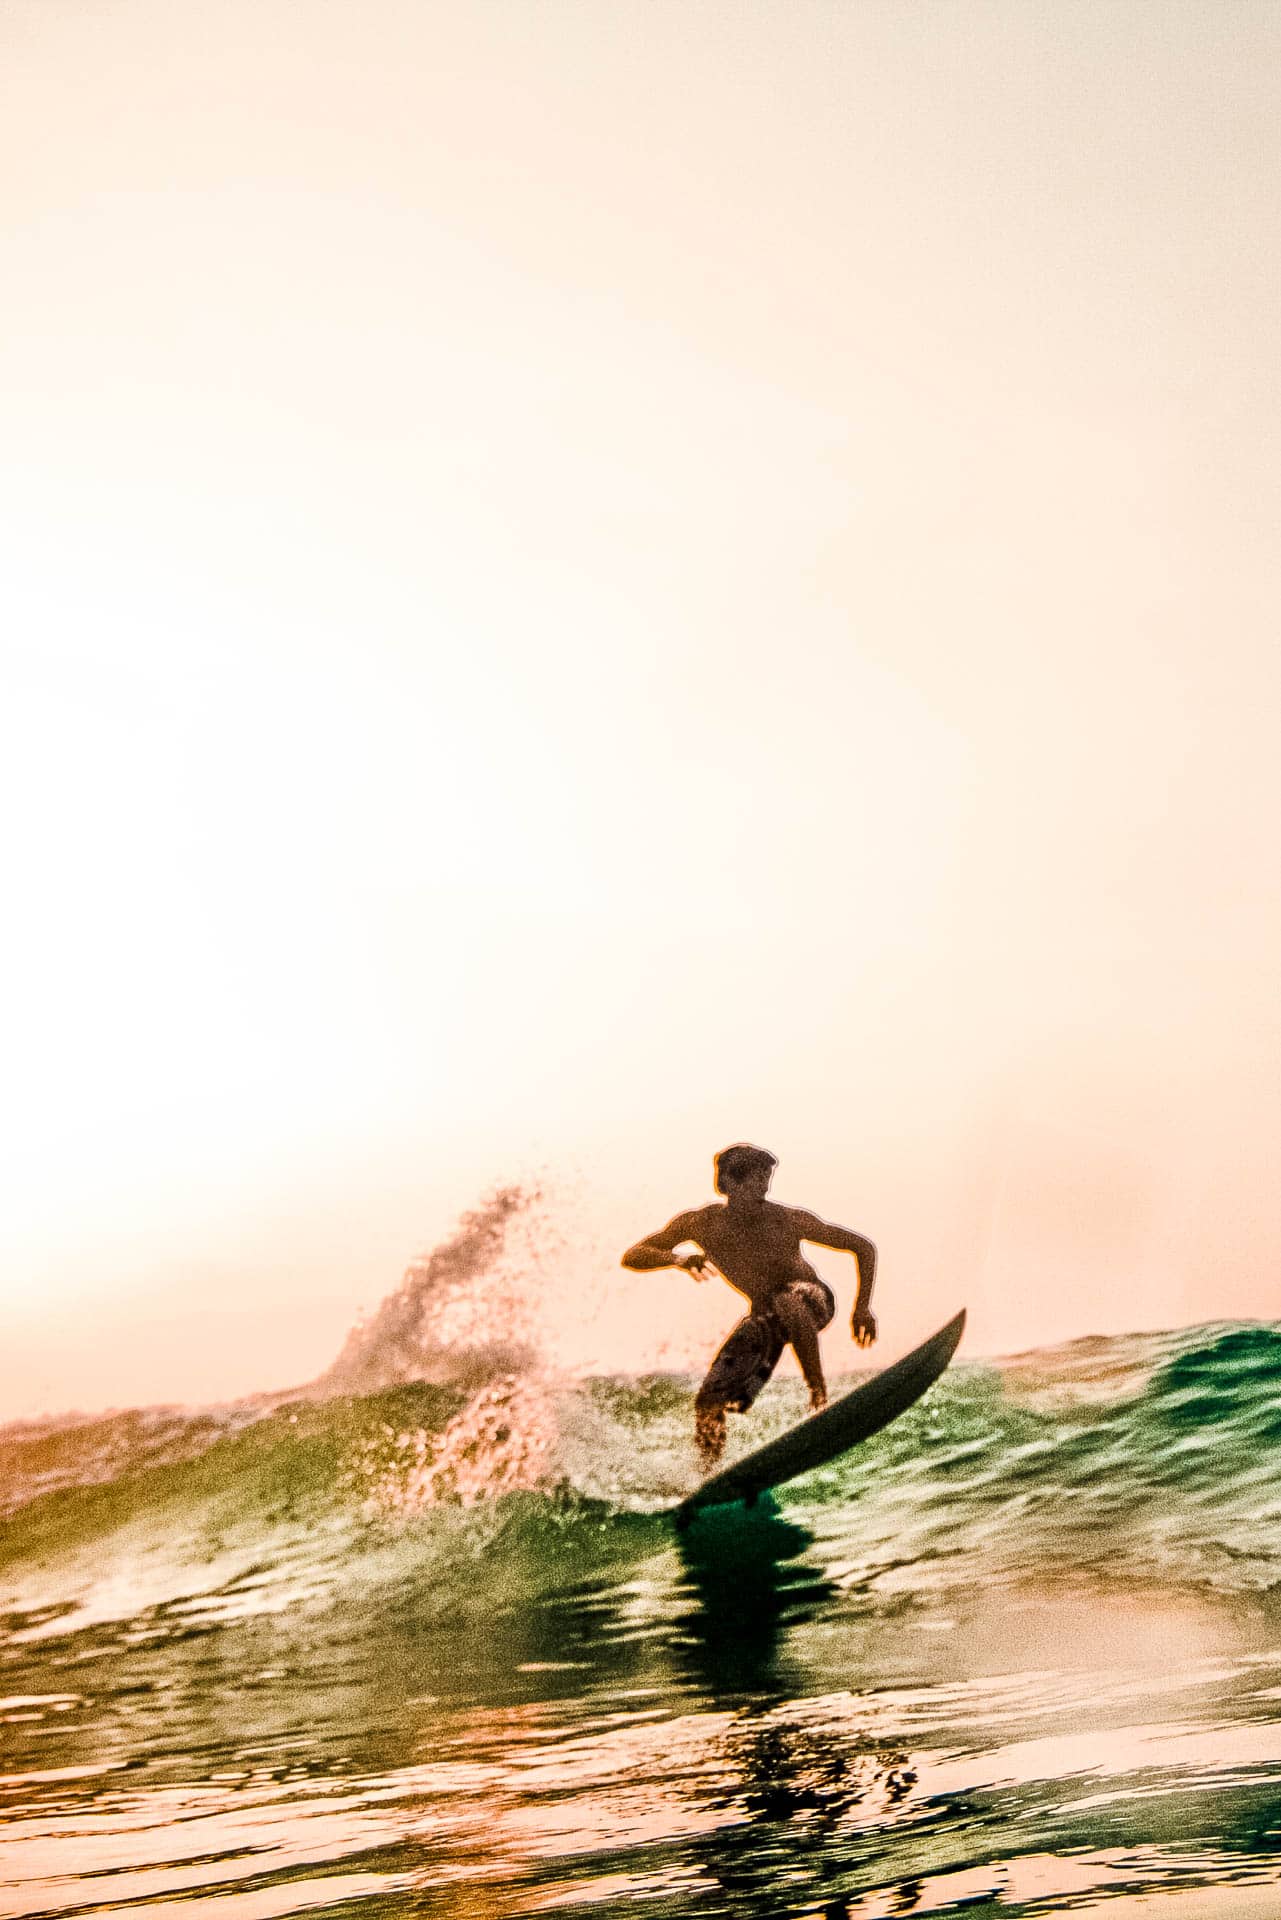 A person surfing in the ocean.